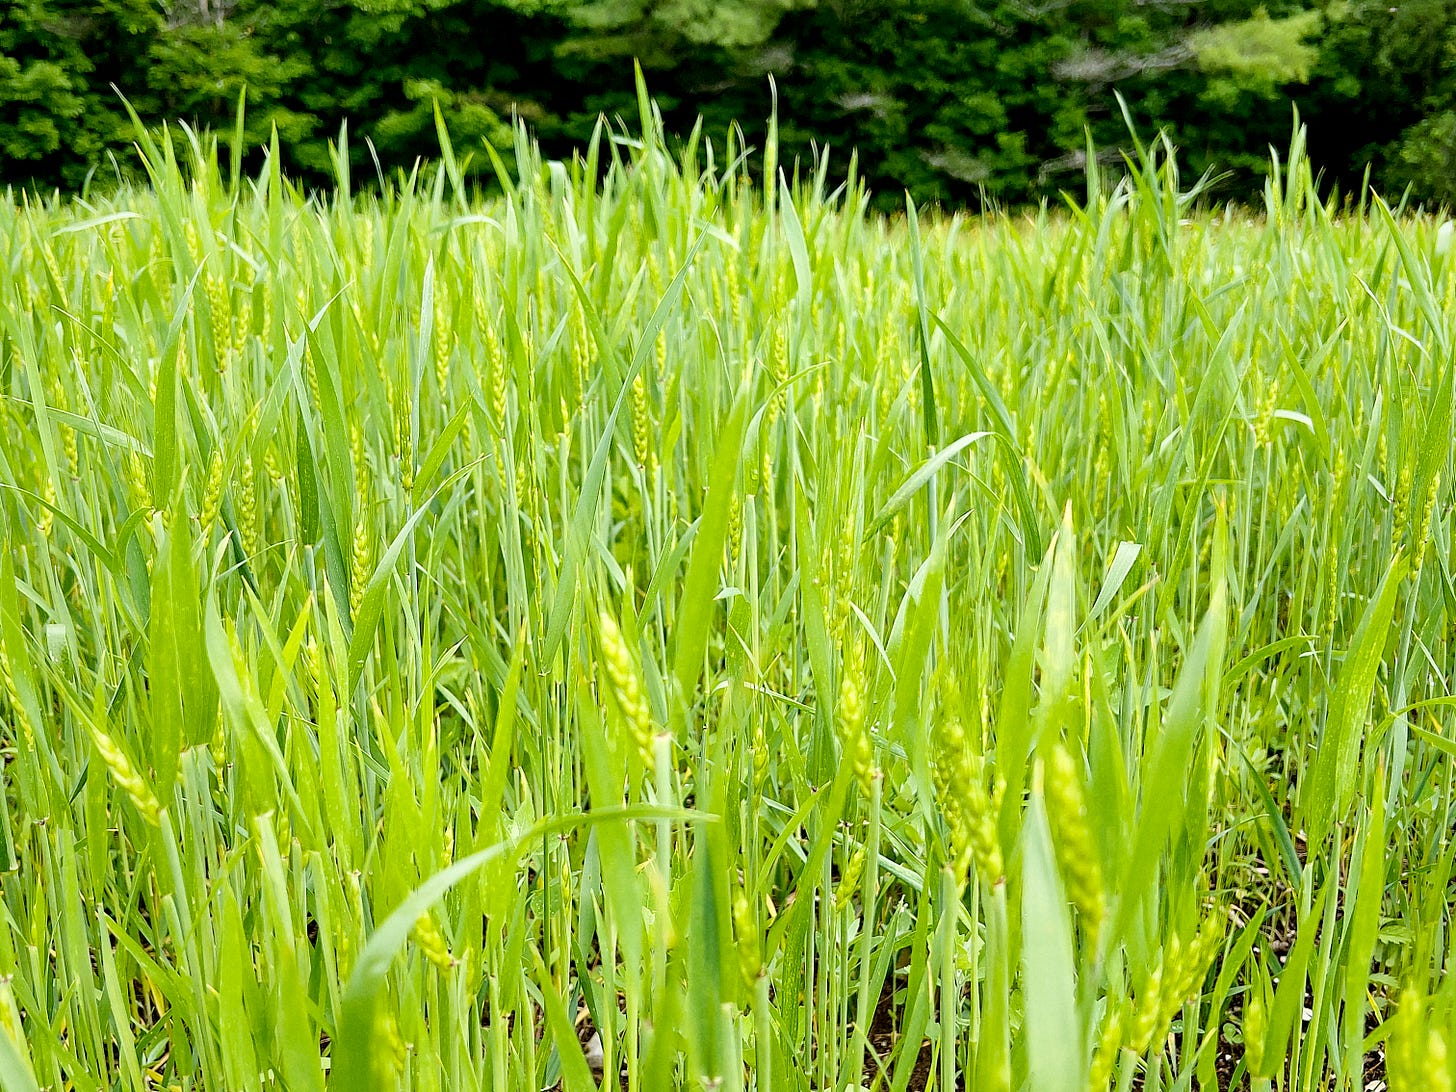 A close up of a field of green summer wheat.